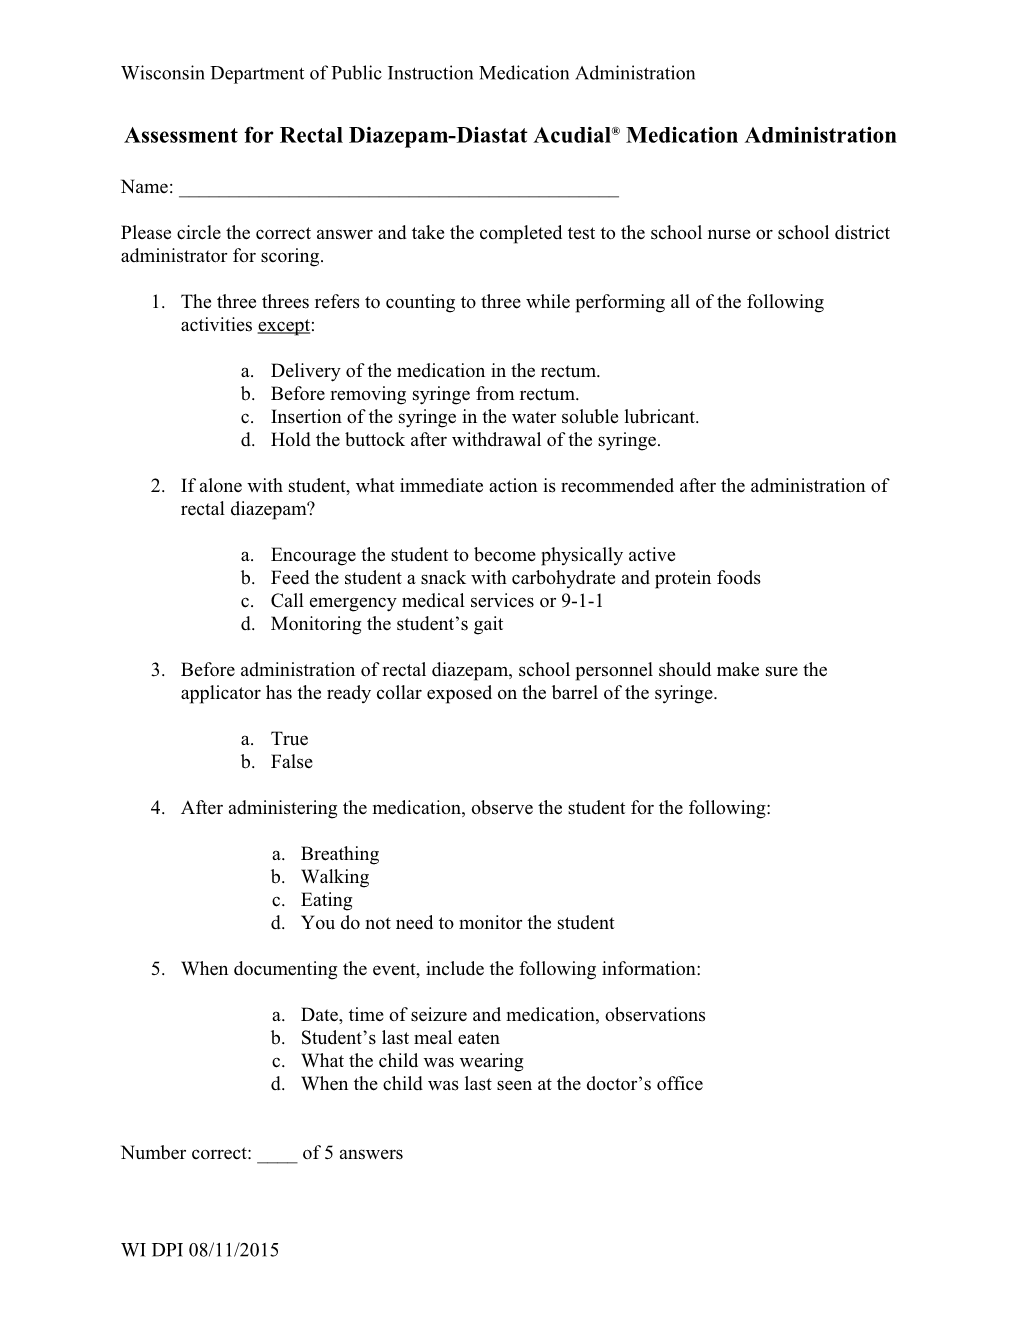 Assessment for Rectal Diazepam-Diastat Acudial Medication Administration